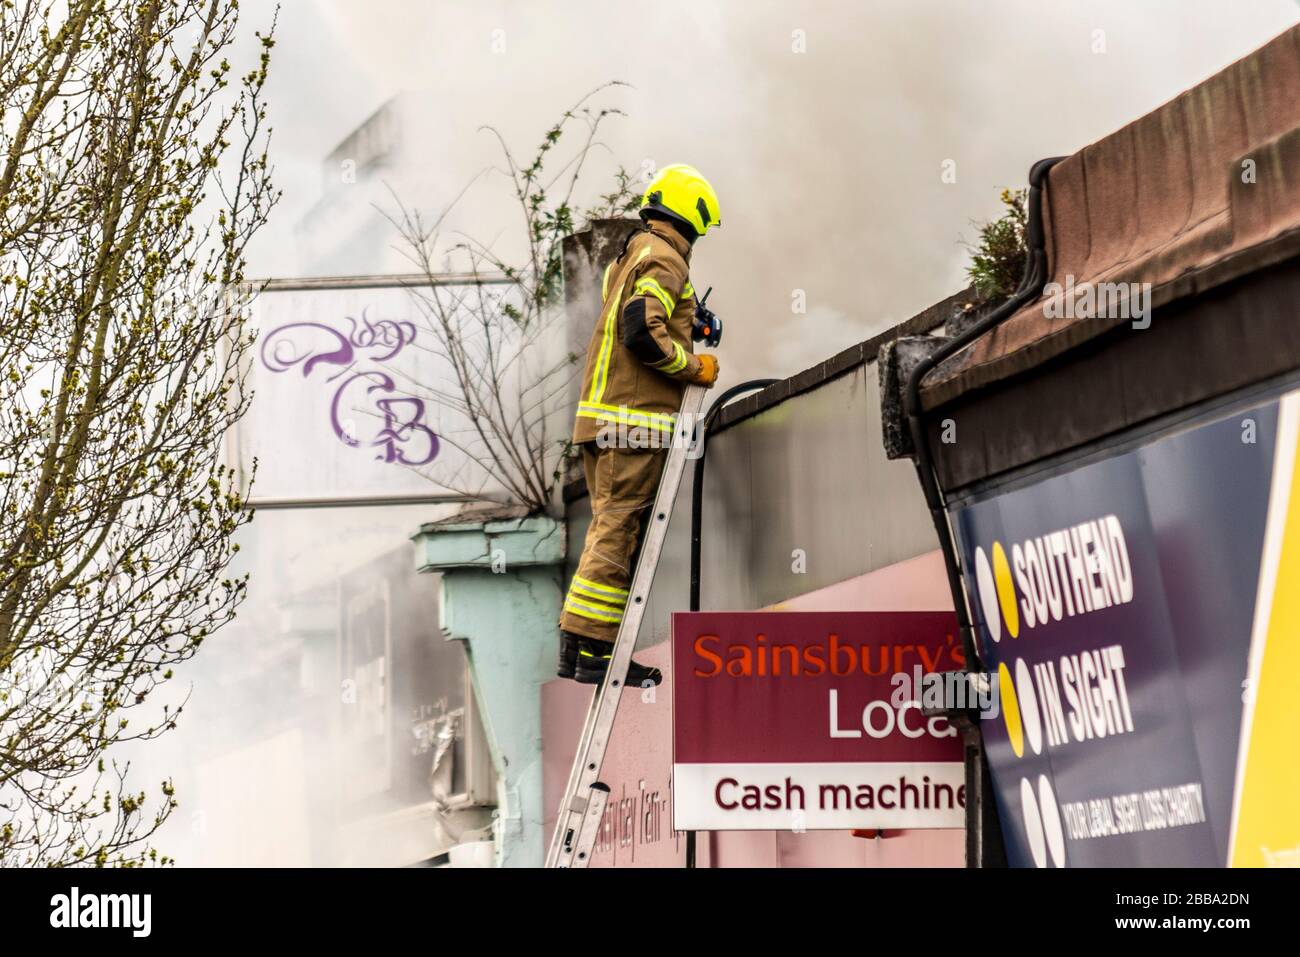 Fire Service dealing with a fire next to Sainsbury's supermarket in Westcliff on Sea, Essex, UK during COVID-19 lockdown. Cannabis plants discovered Stock Photo